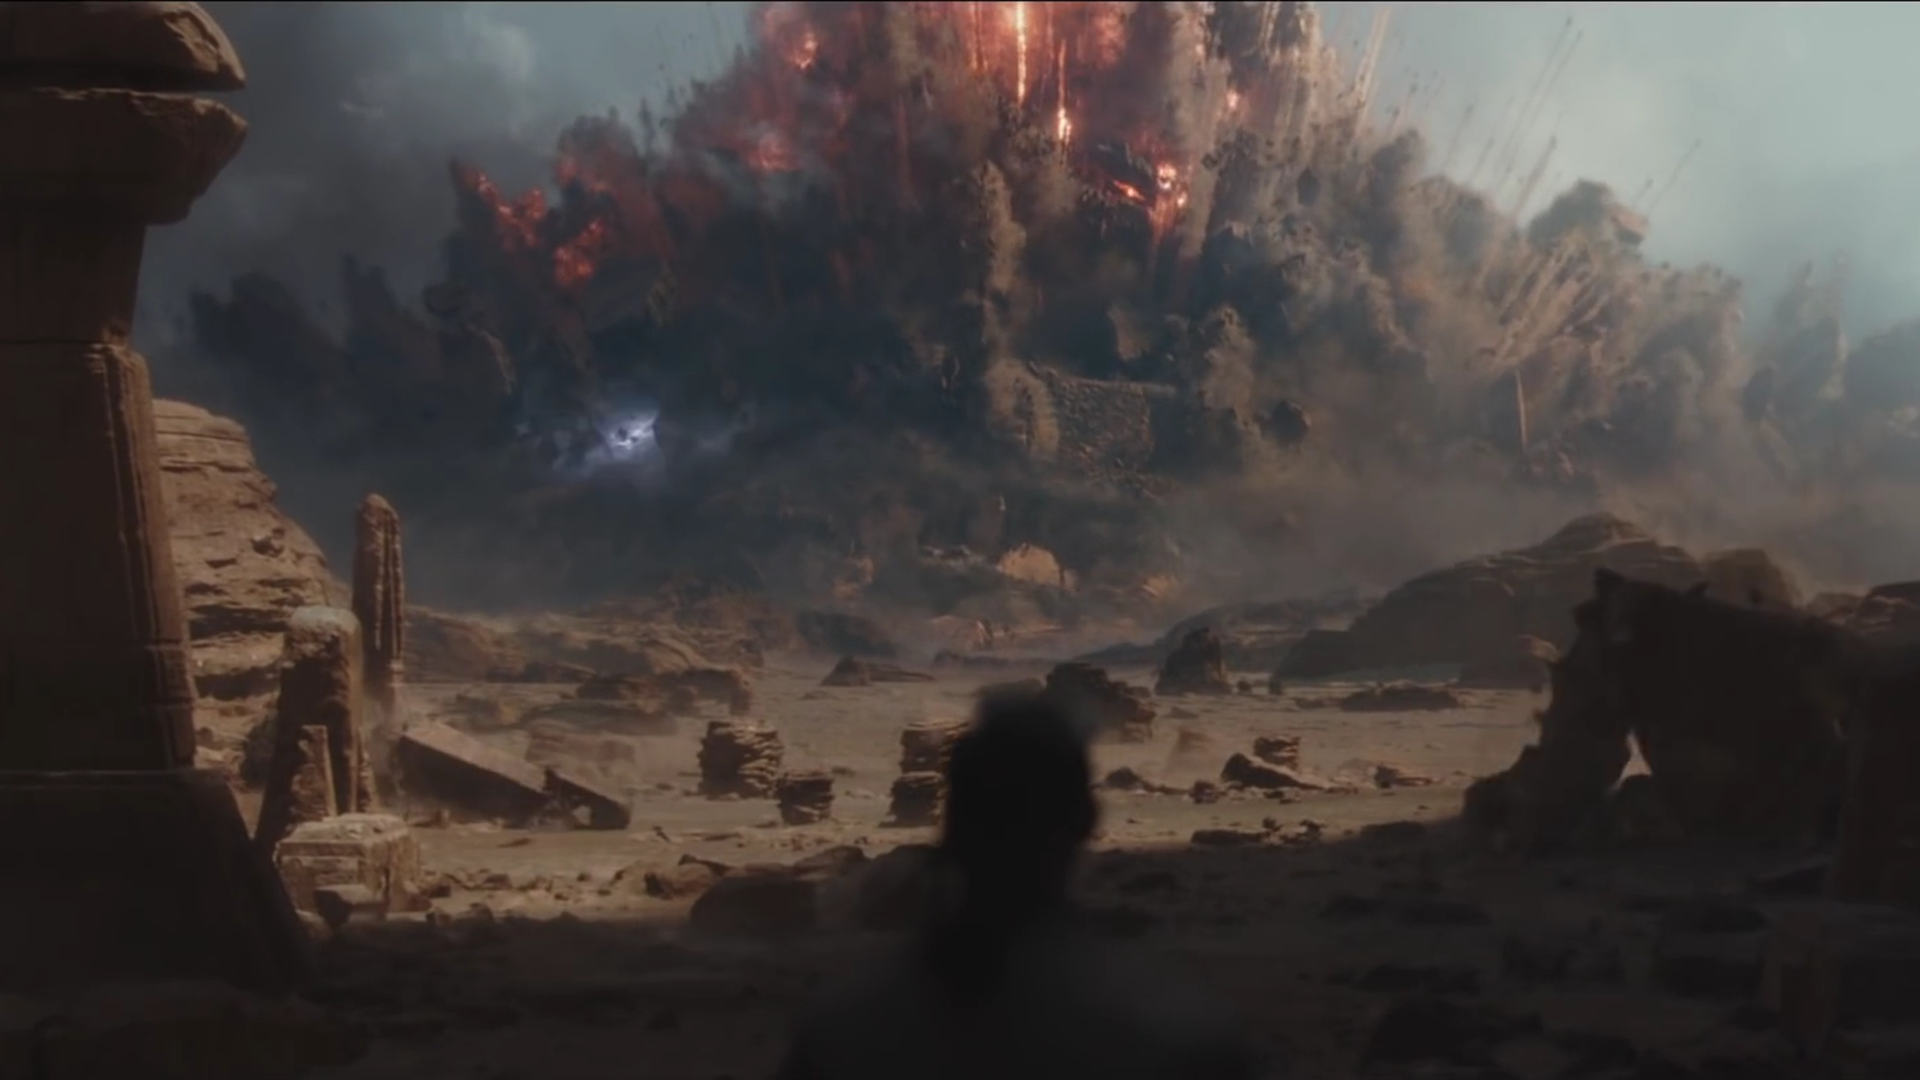 Star Wars Rogue One Explosion - HD Wallpaper 